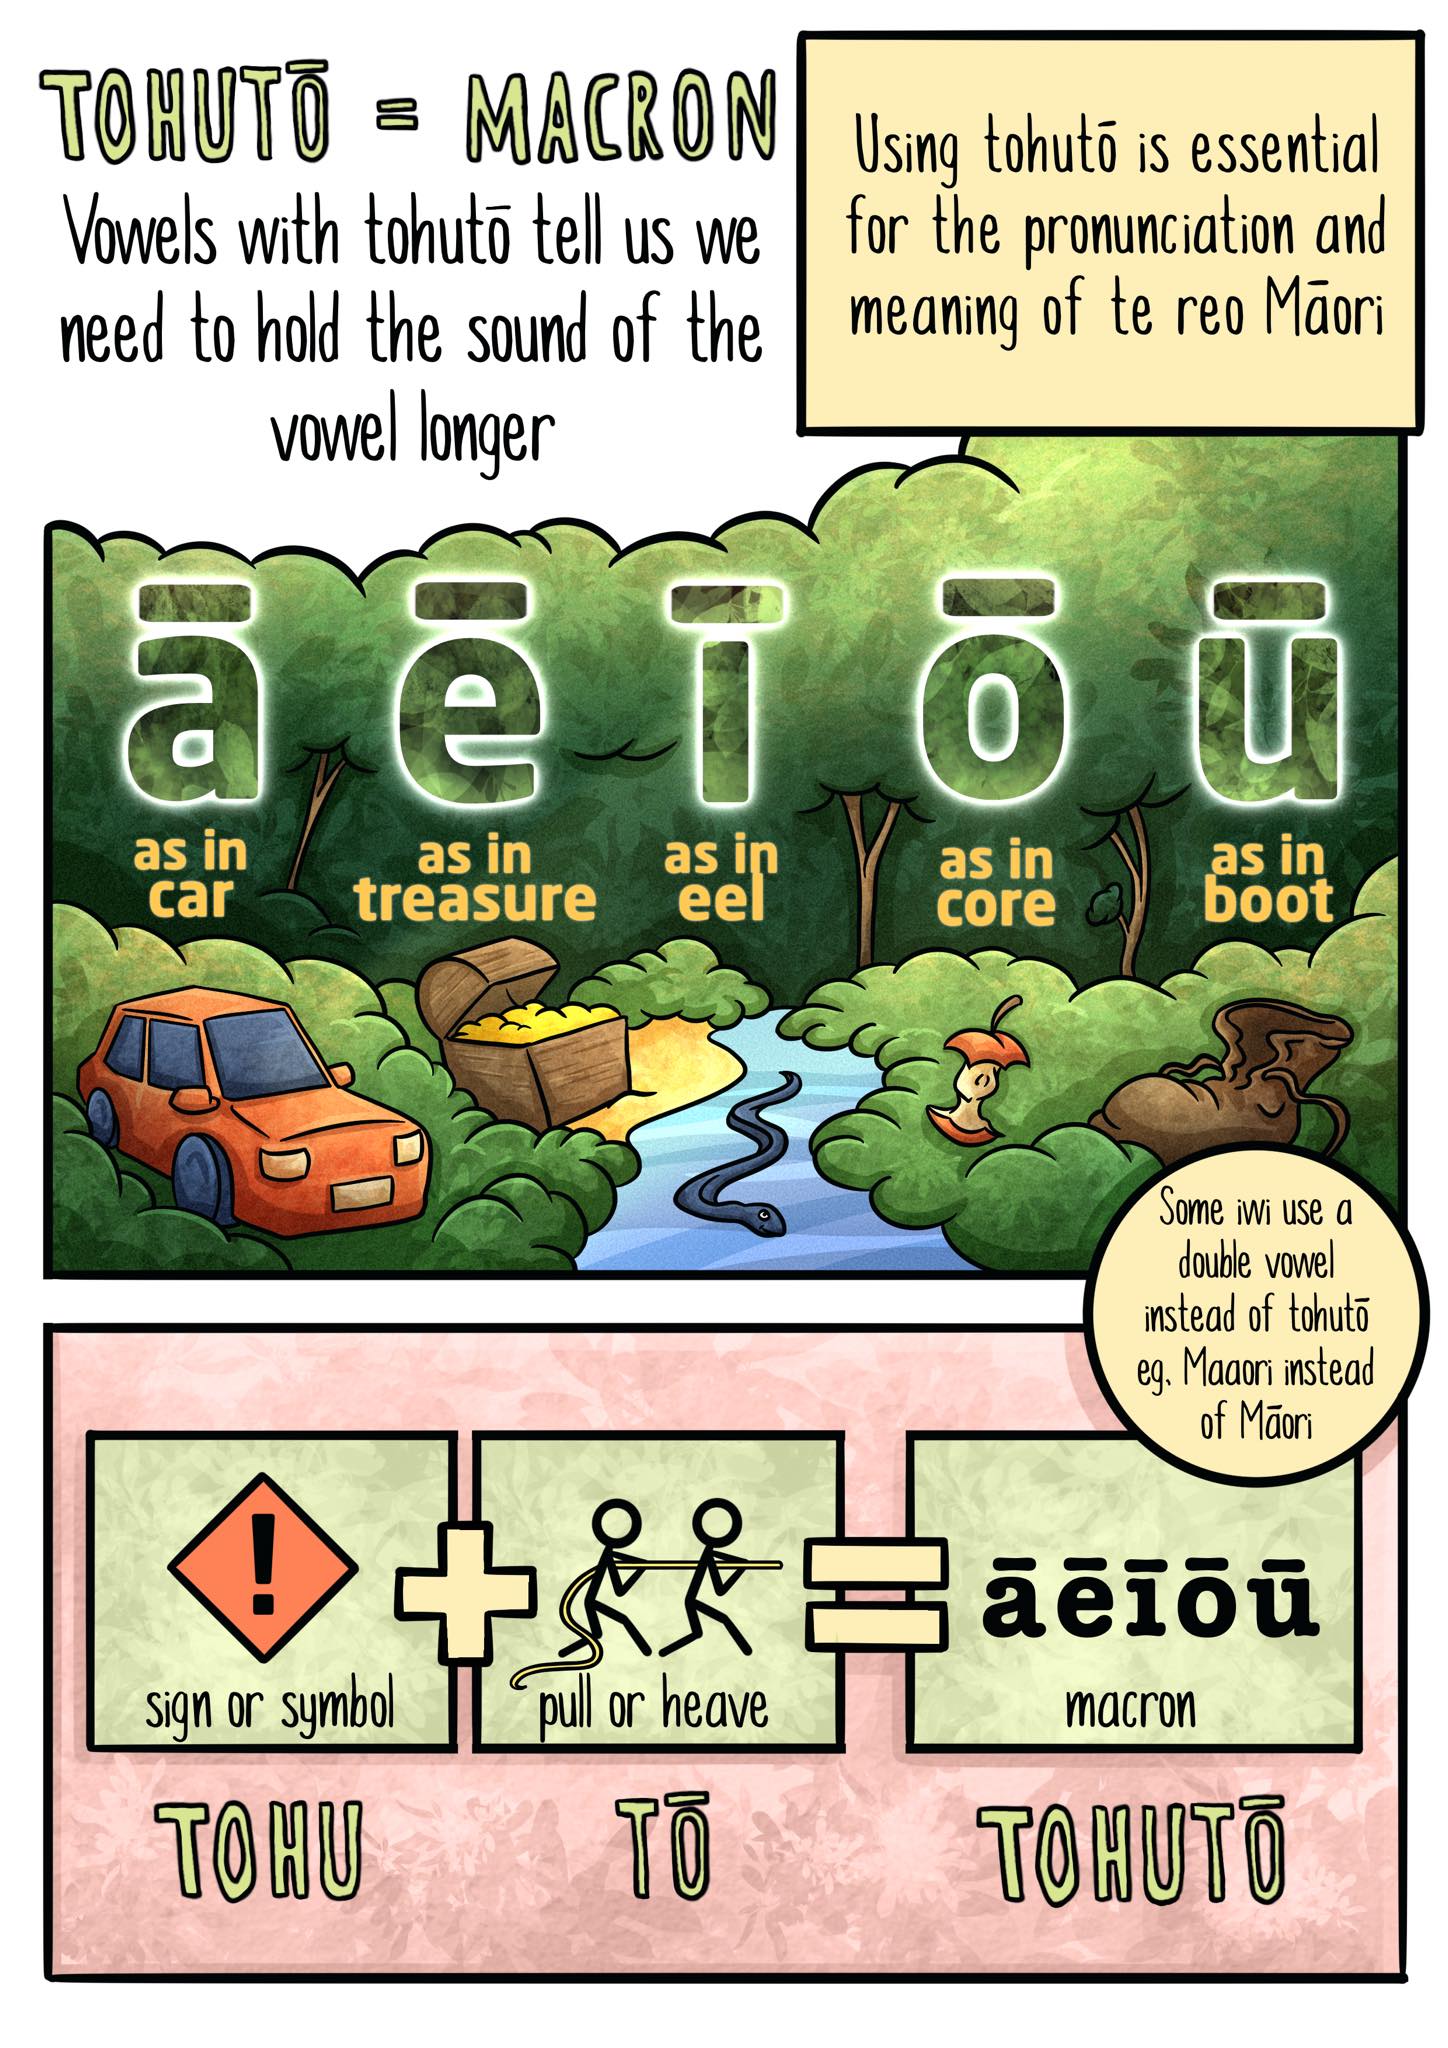 Image showing how tohutō (macron) looks in te reo Māori and how to pronouce the sounds.